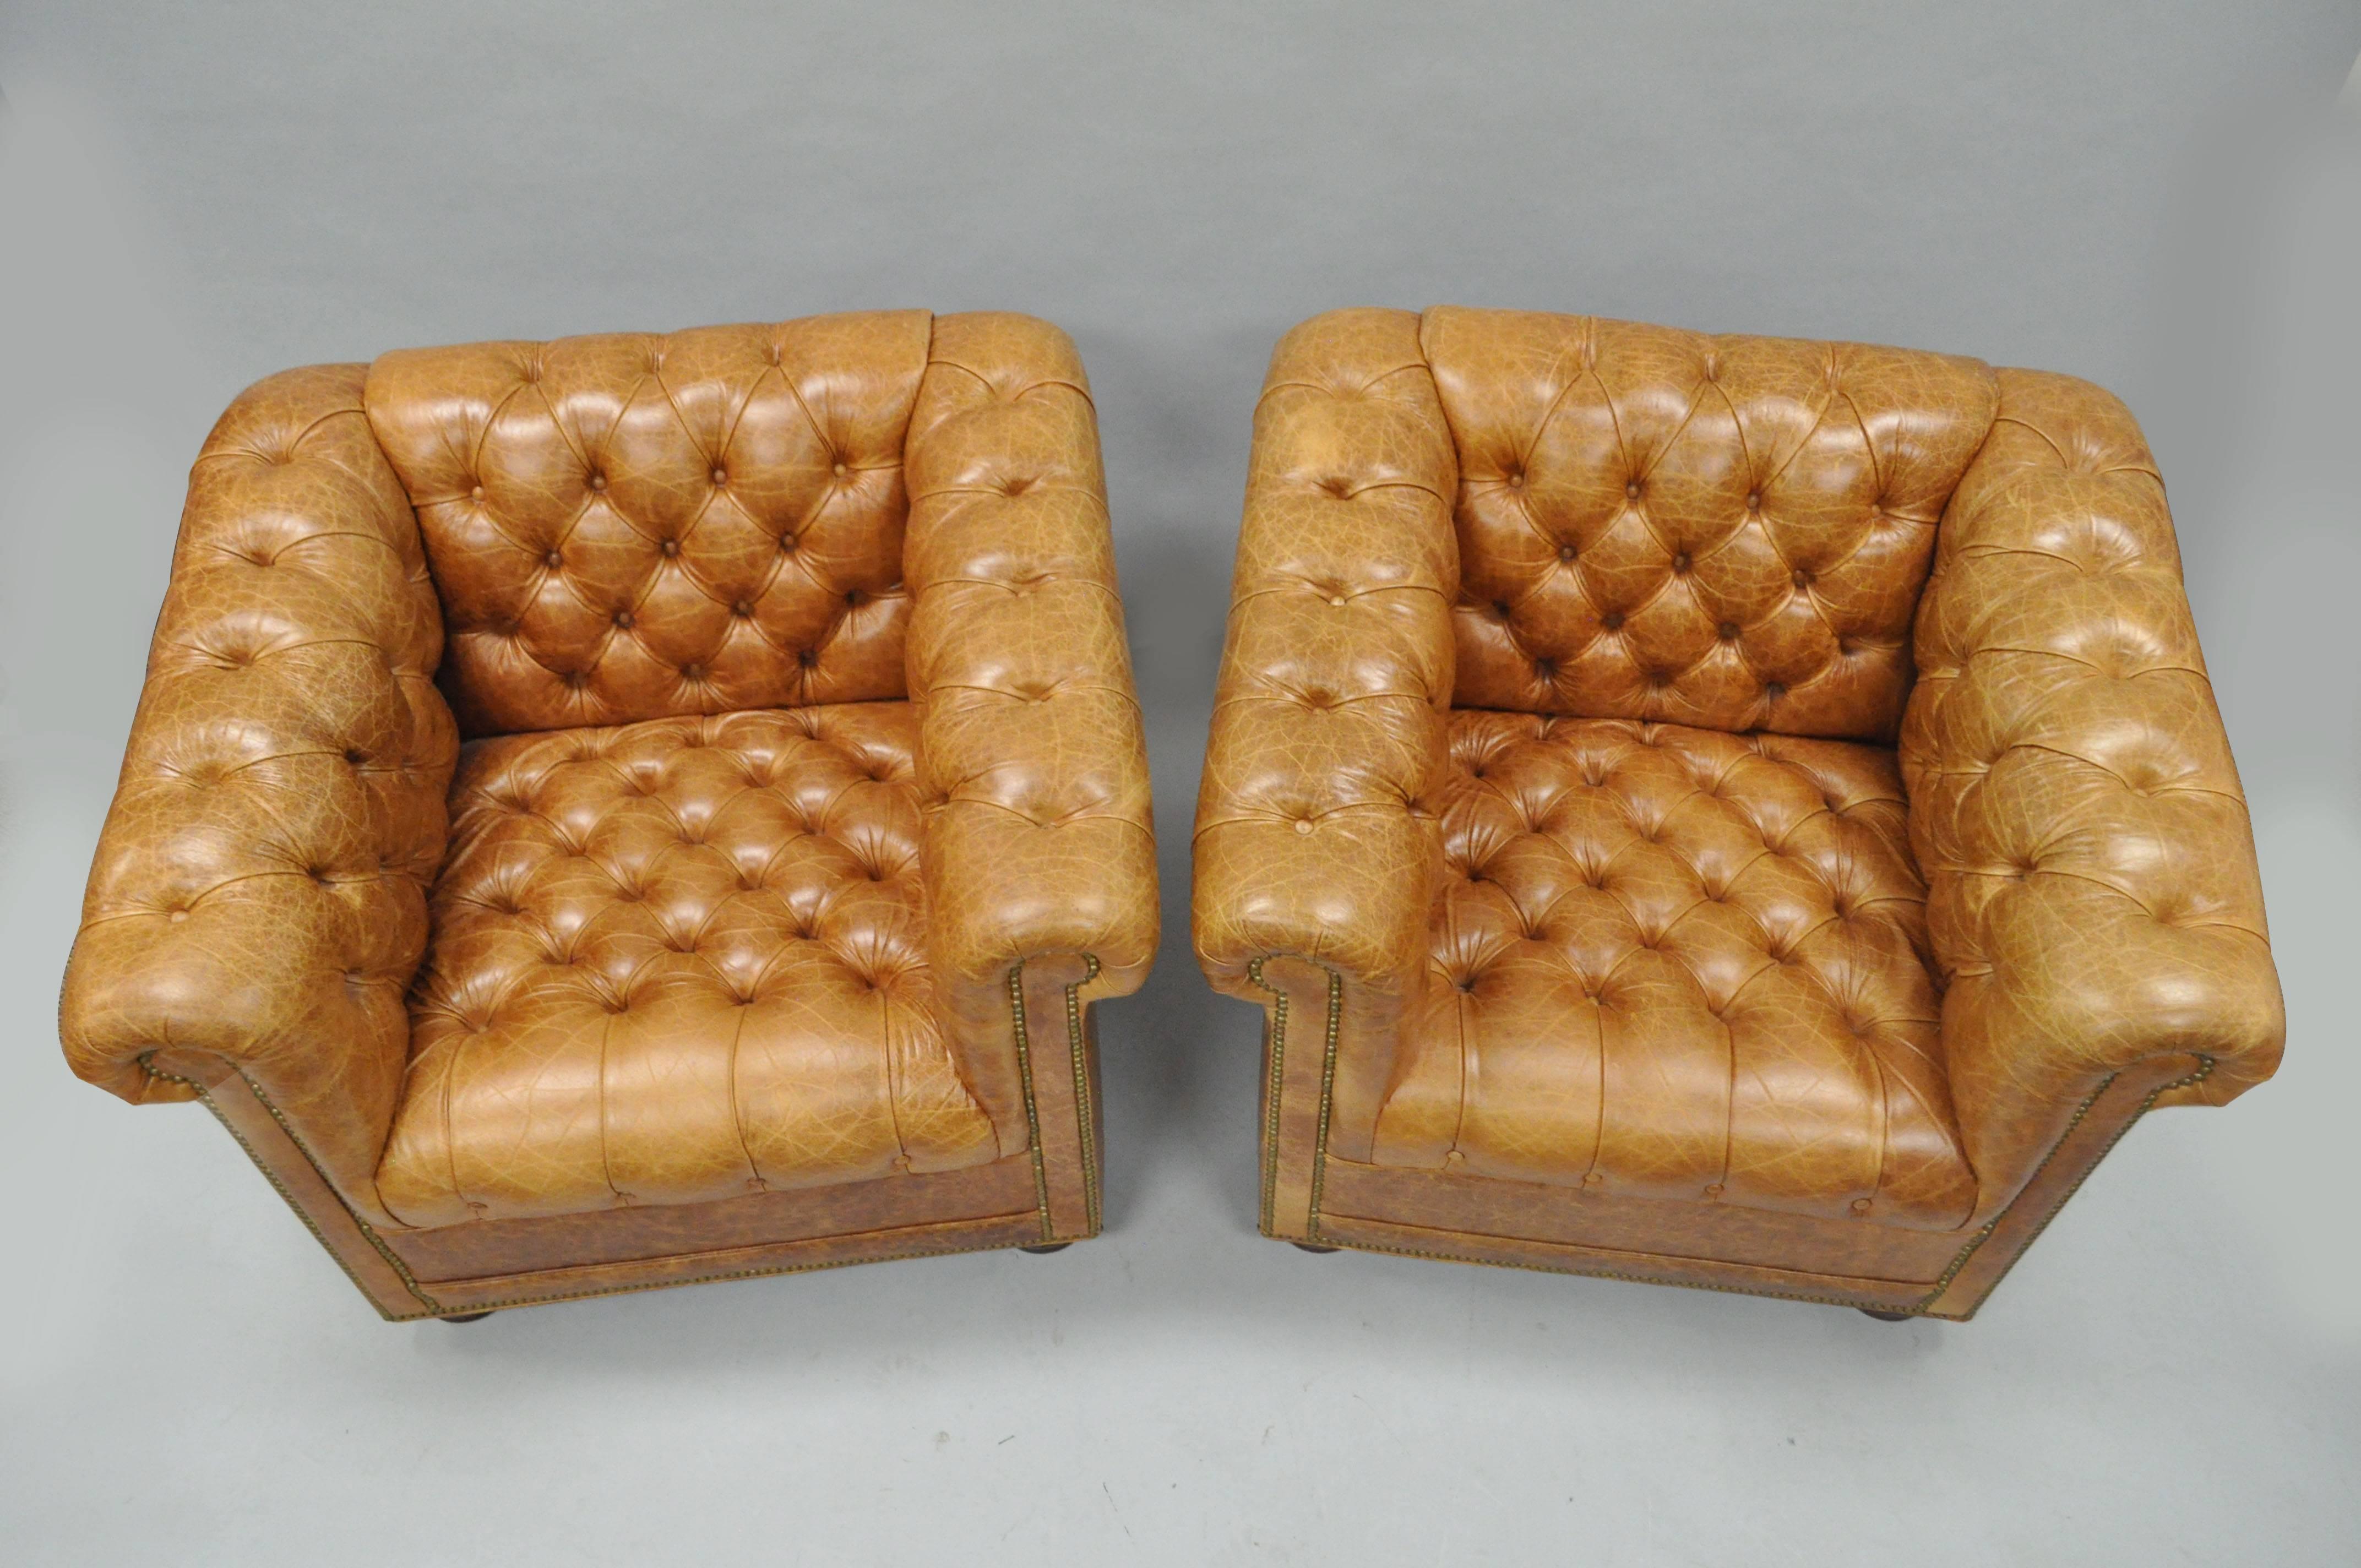 leather tufted club chair